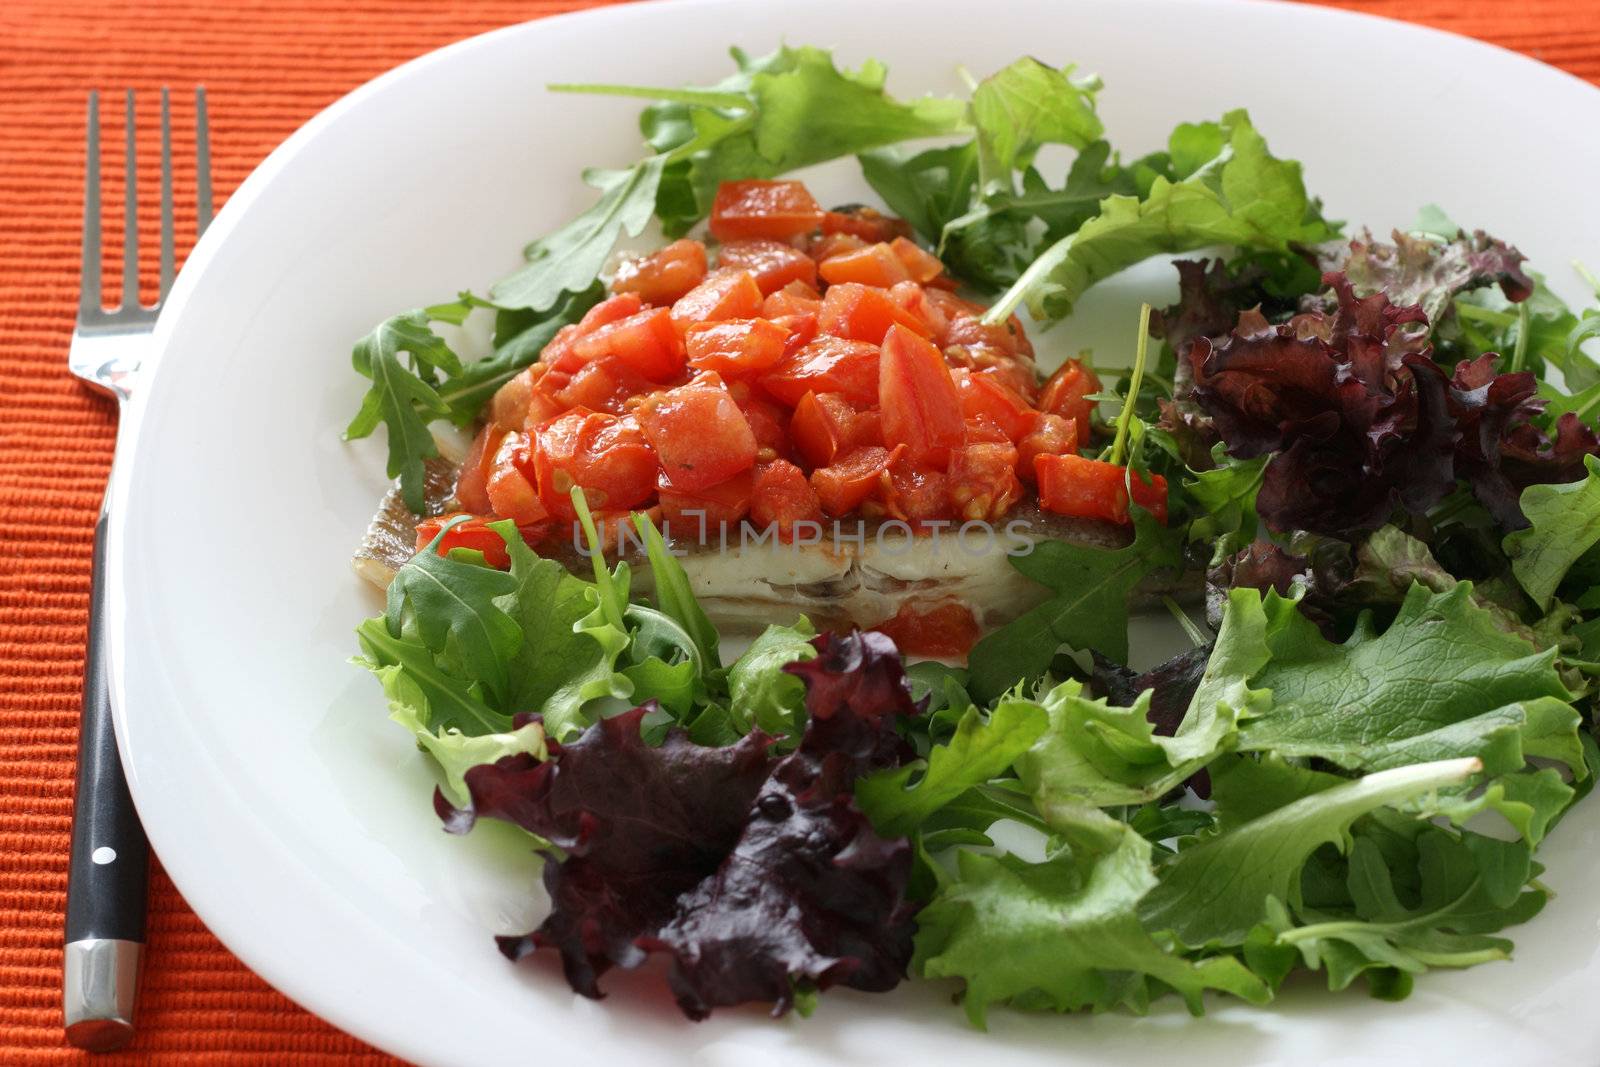 fried fish with cut tomato and salad